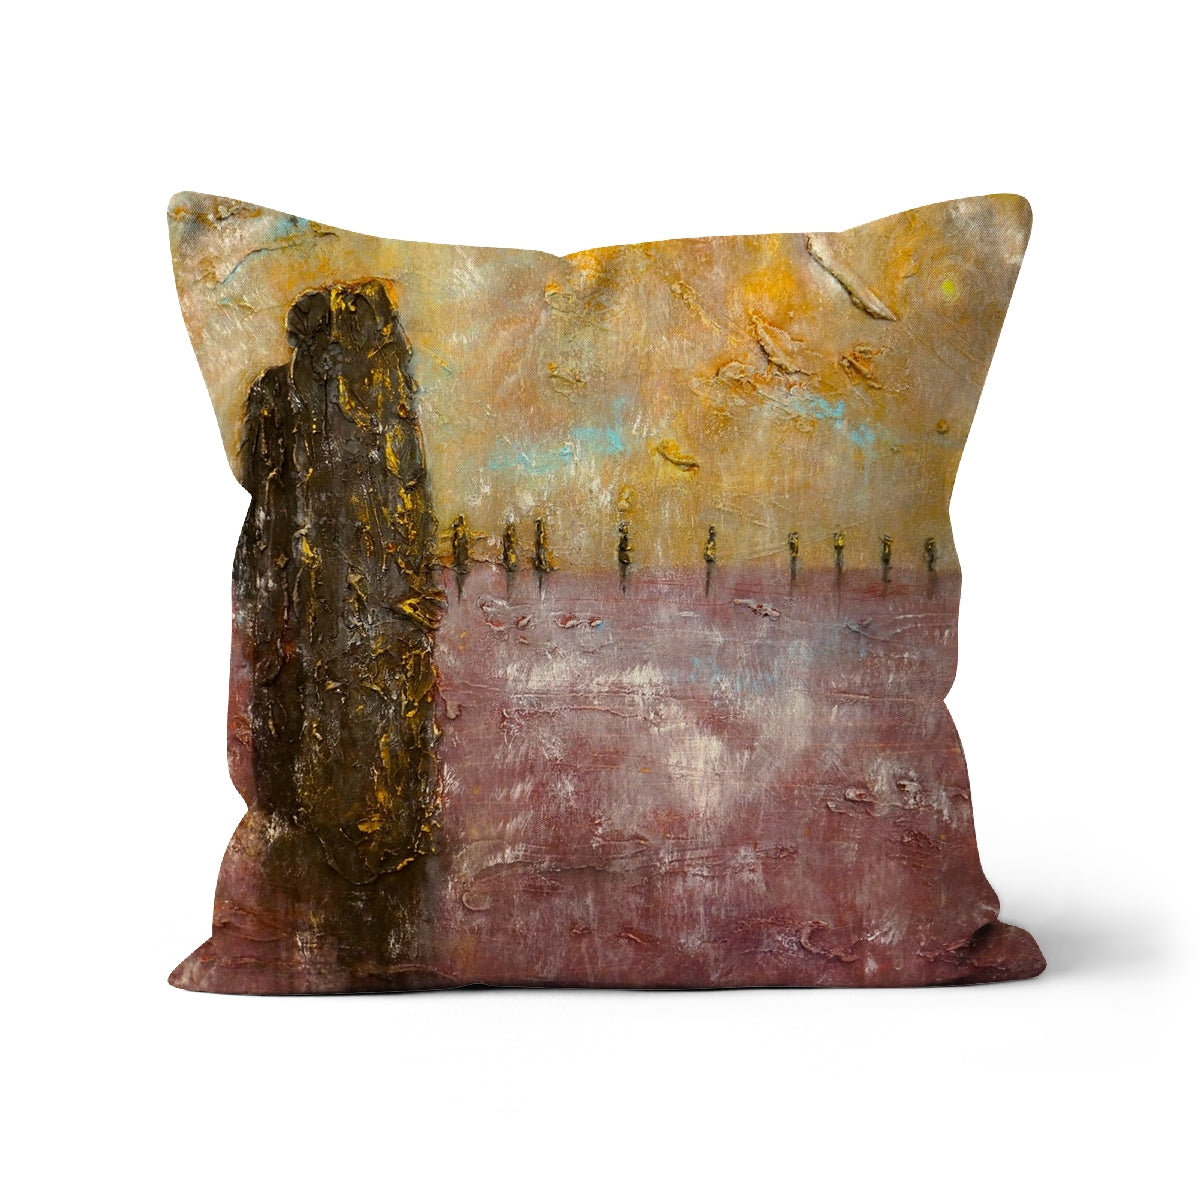 Bordgar Mist Orkney Art Gifts Cushion-Cushions-Orkney Art Gallery-Faux Suede-16"x16"-Paintings, Prints, Homeware, Art Gifts From Scotland By Scottish Artist Kevin Hunter